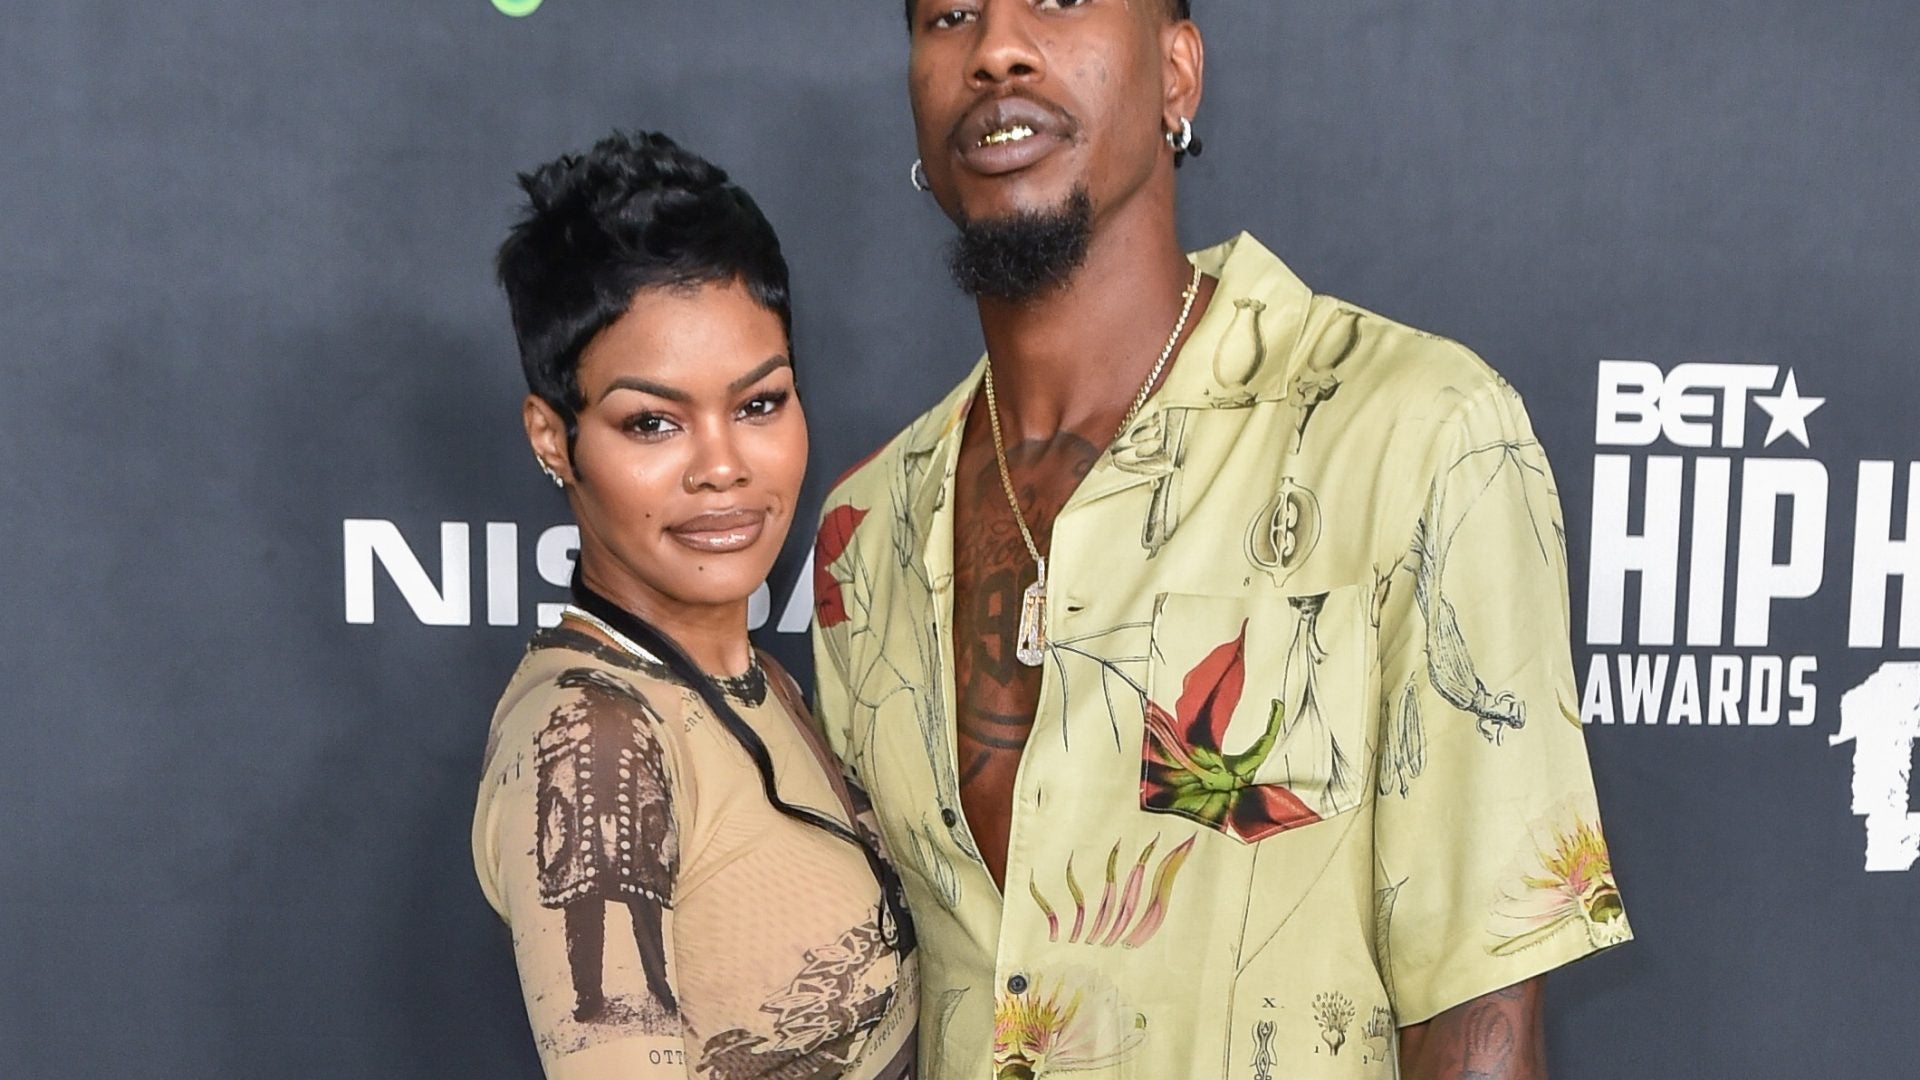 Teyana Taylor Accuses Her Estranged Husband, Iman Shumpert, Of Being Under The Influence And Negligent While Caring For Their Daughters